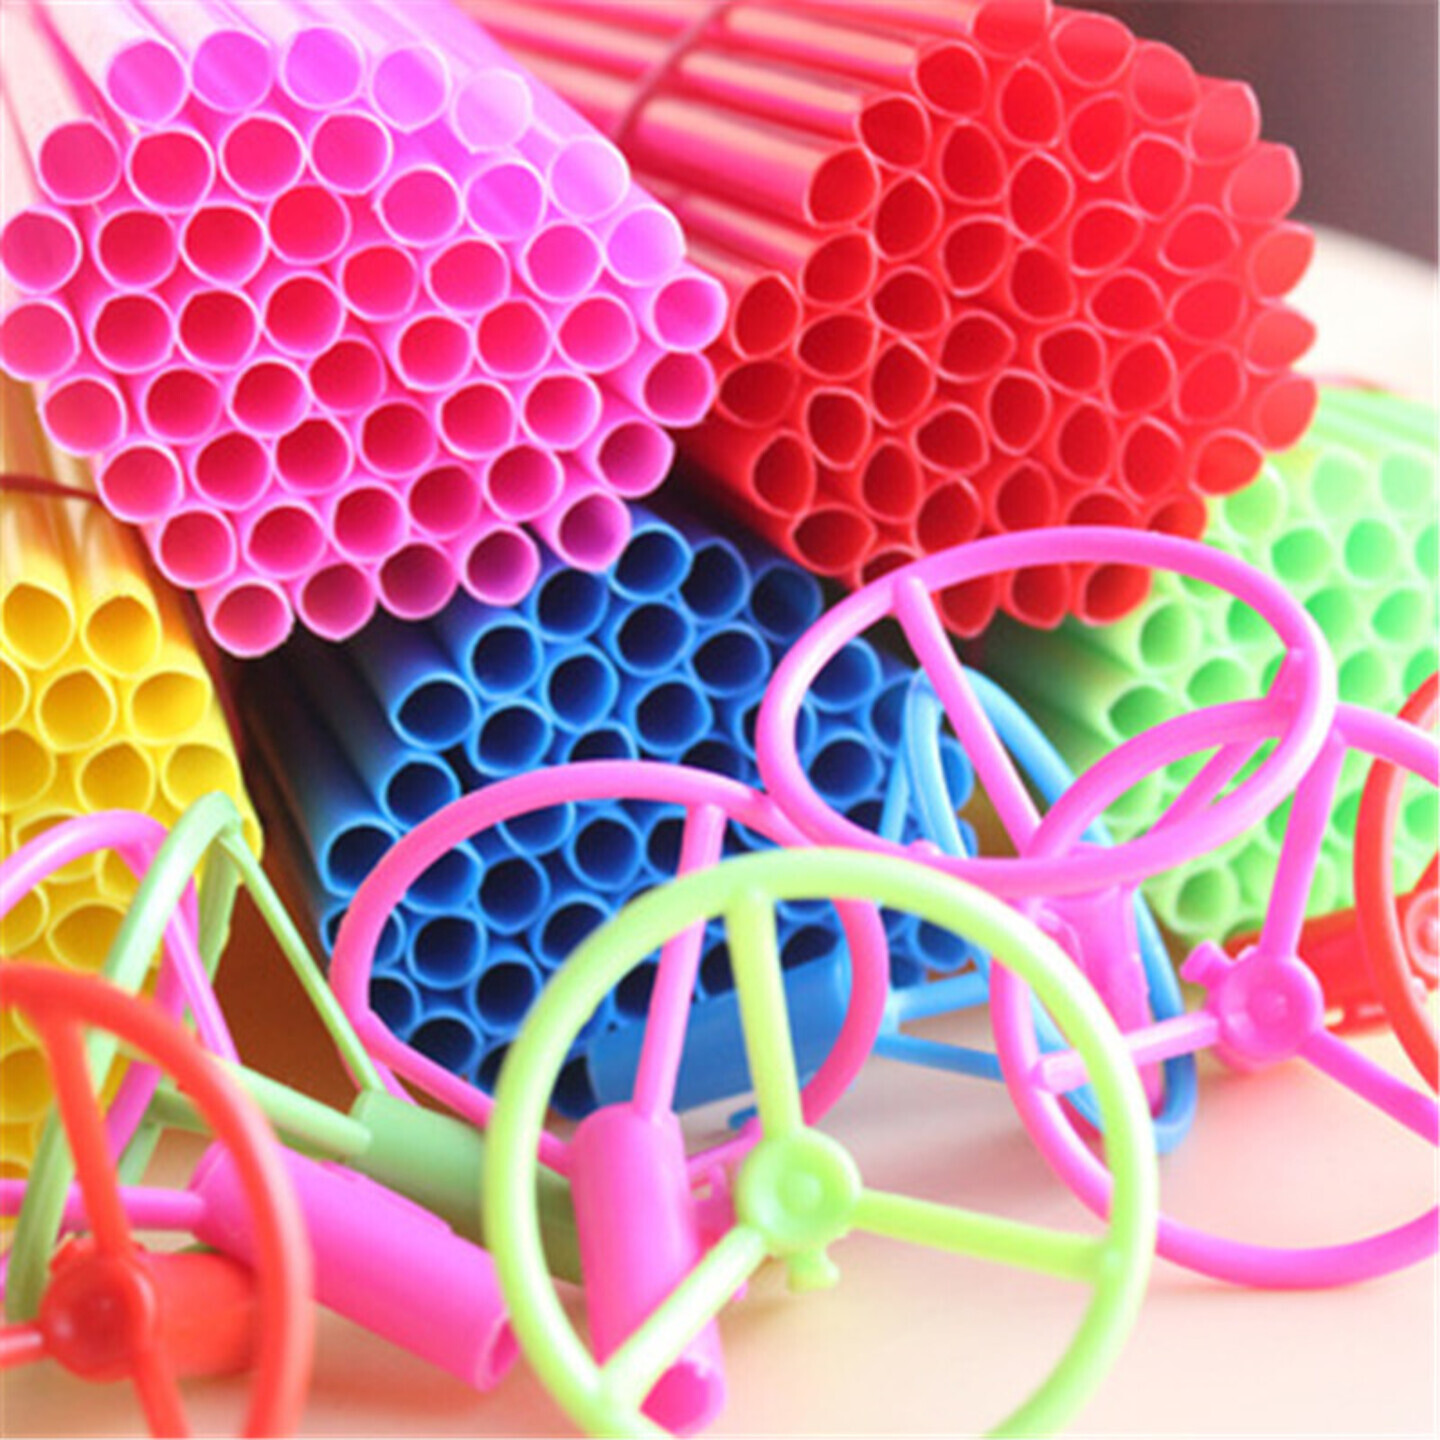 Large Balloon Sticks with Big Cups - 50pcs